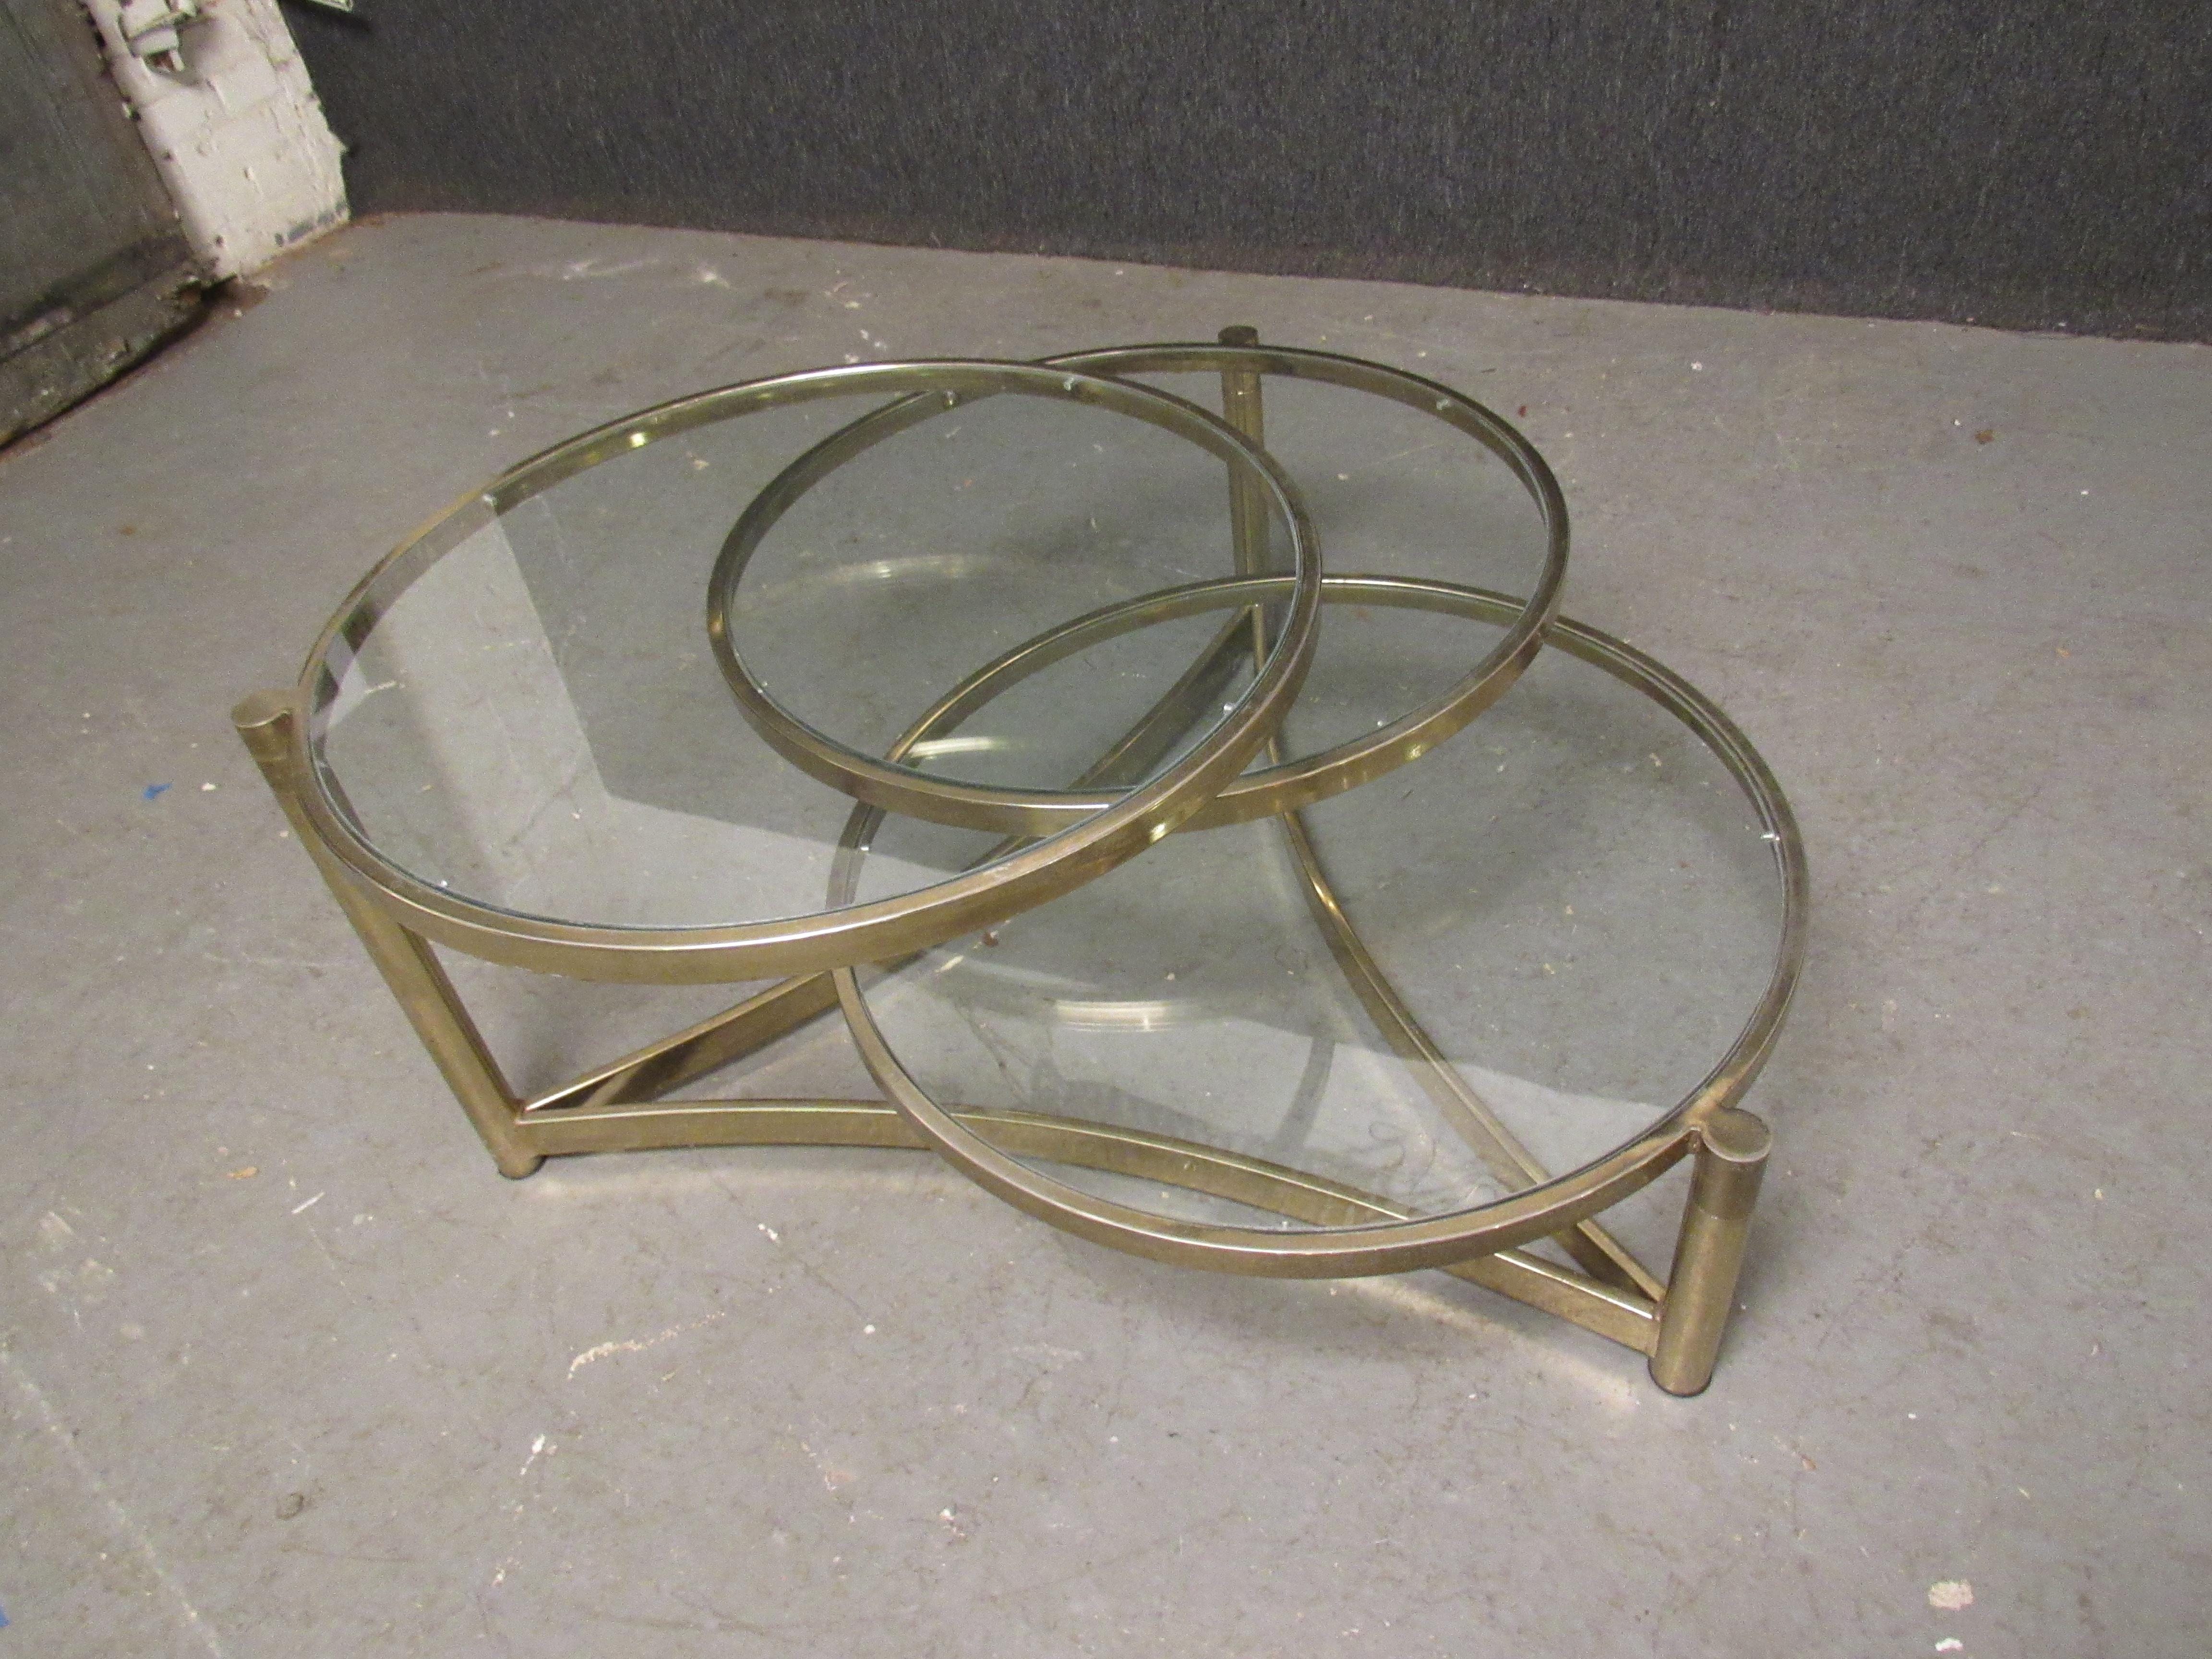 Iconic brass and glass articulated coffee table designed by Milo Baughman- this impressive modernist piece is versatile in so many ways- blending aesthetic stylings of Mid-Century Modern, Post-Modern, Hollywood Regency, and beyond. It's soft brass